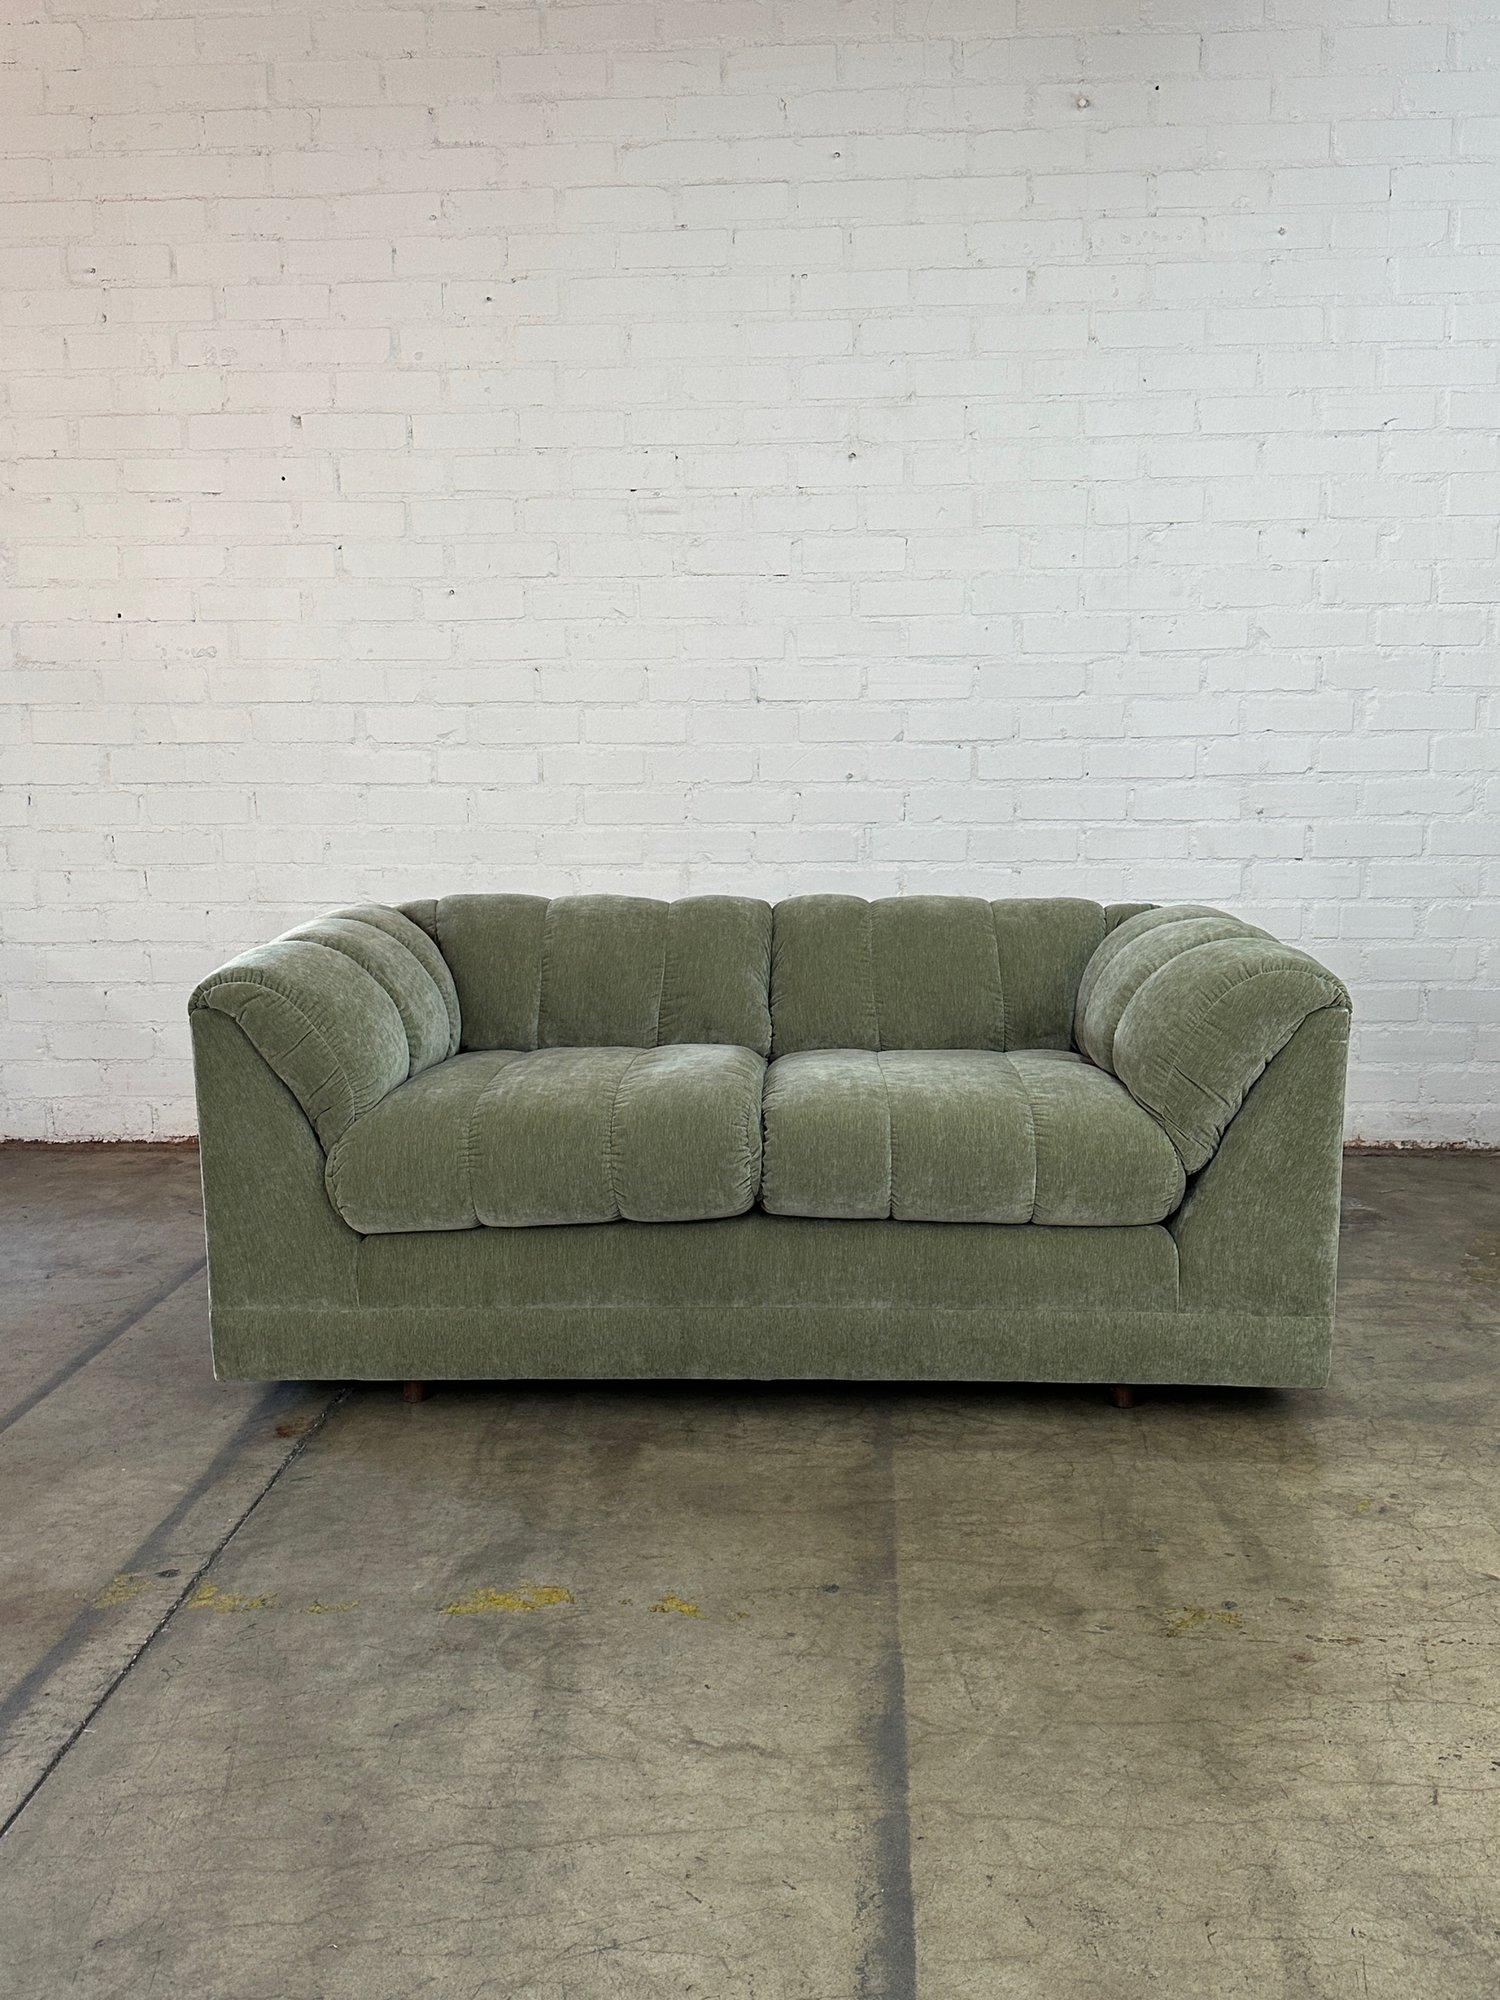 Vintage Channel Tufted Sofa In Good Condition For Sale In Los Angeles, CA